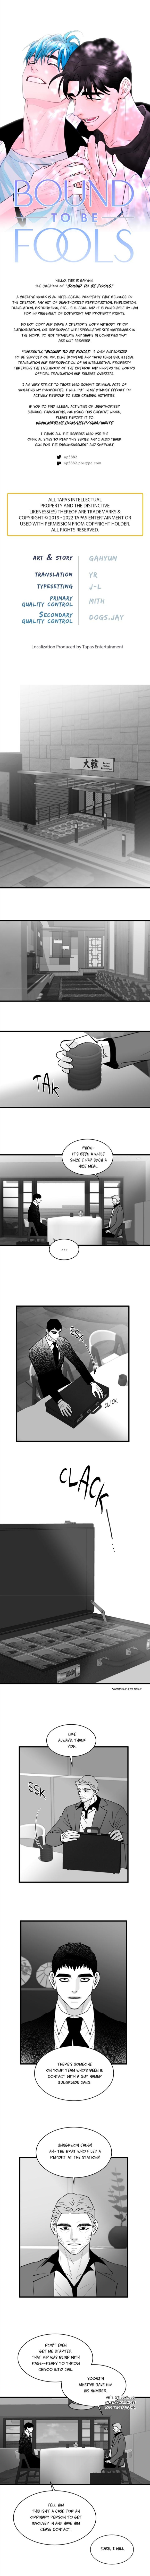 Bound To Be Fools - Page 1